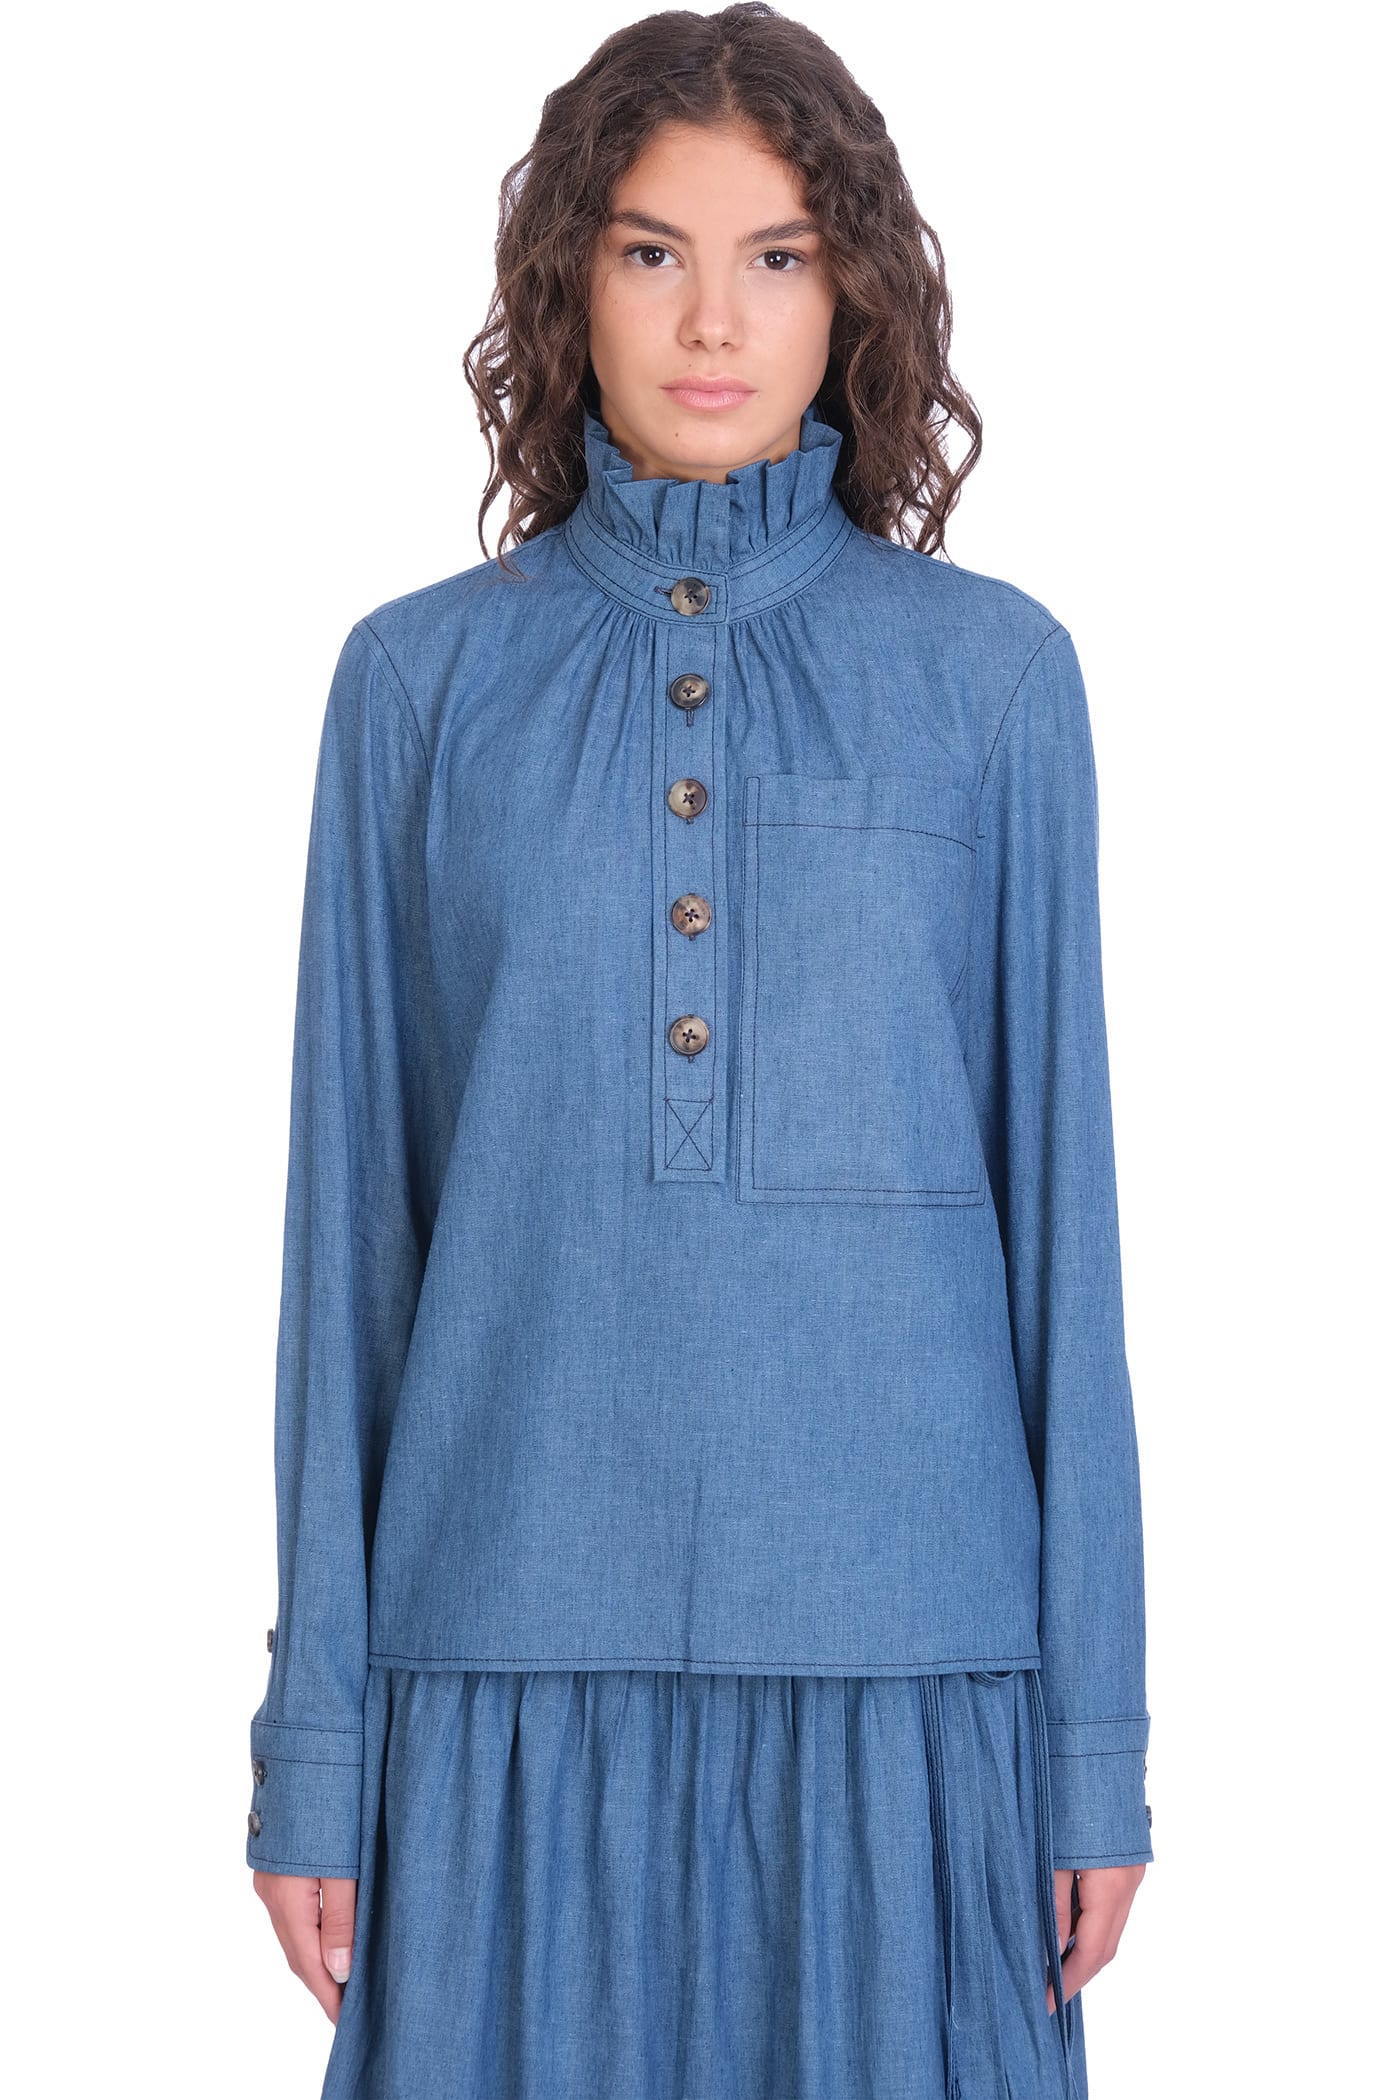 Tory Burch Blouse In Blue Cotton